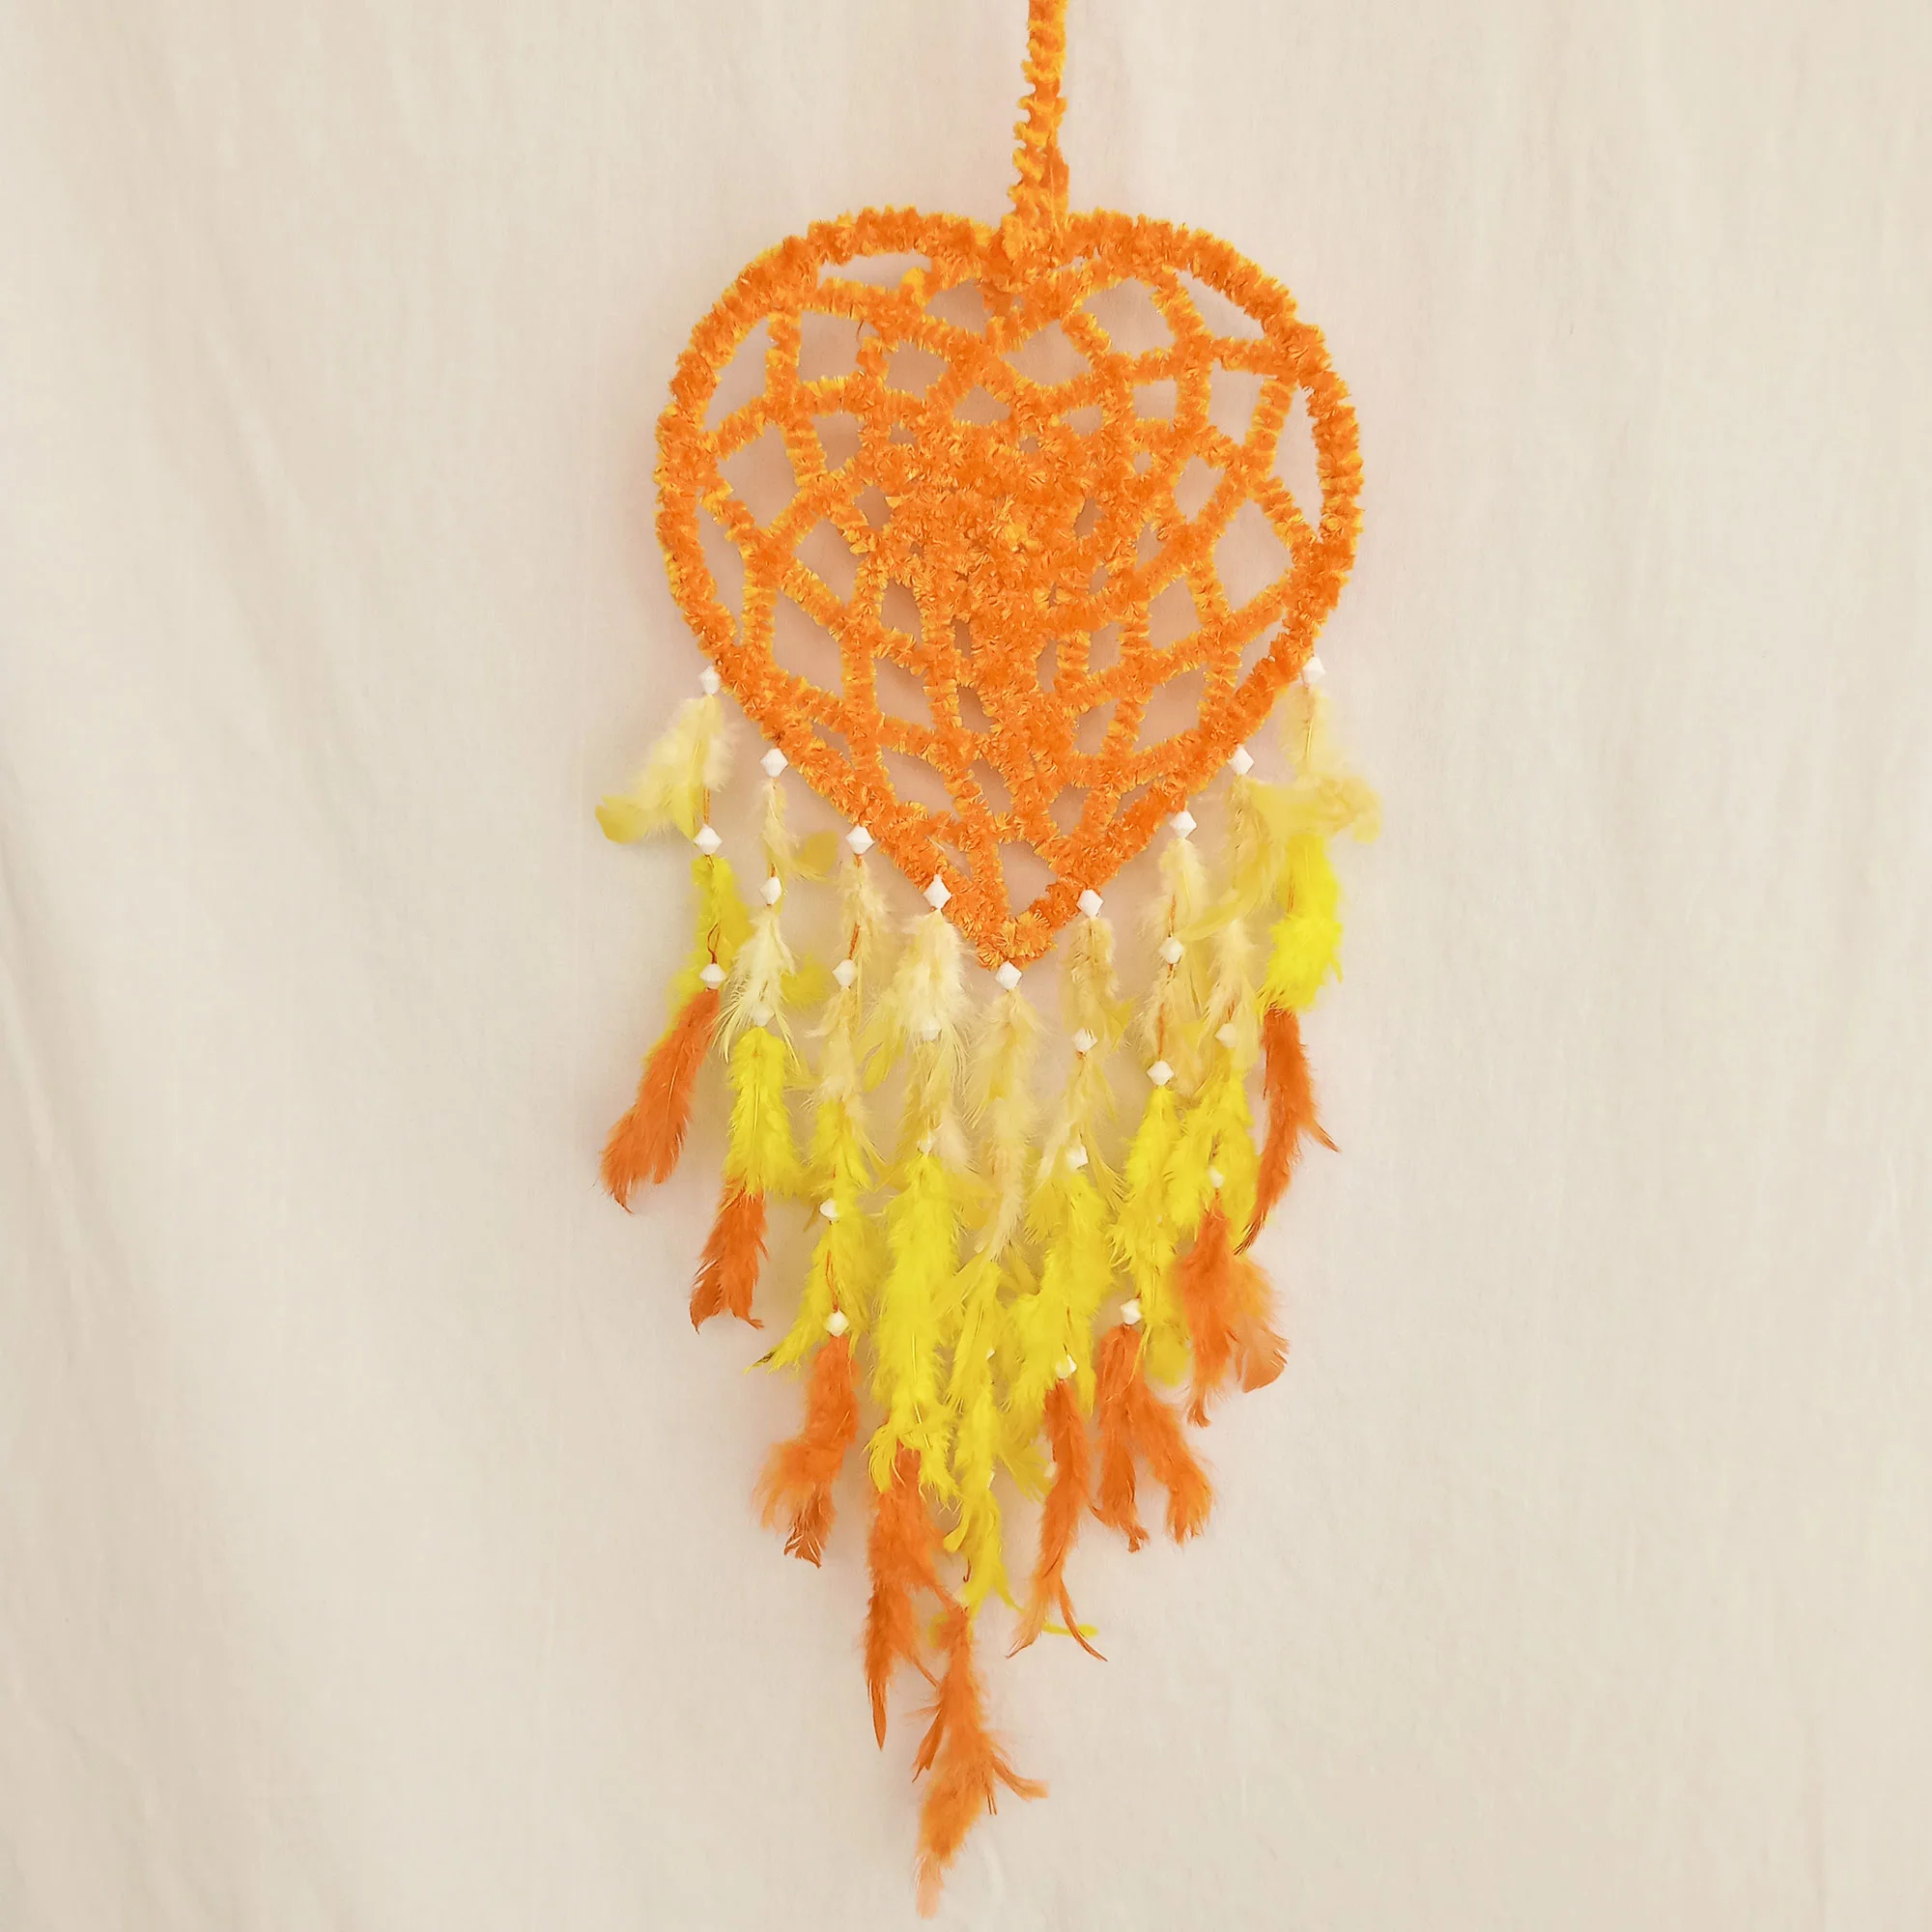 Orange Yellow Dream Catcher For Wall Hangings, Home Décor, Handmade for Bedroom, Balcony Decorative with Feathers